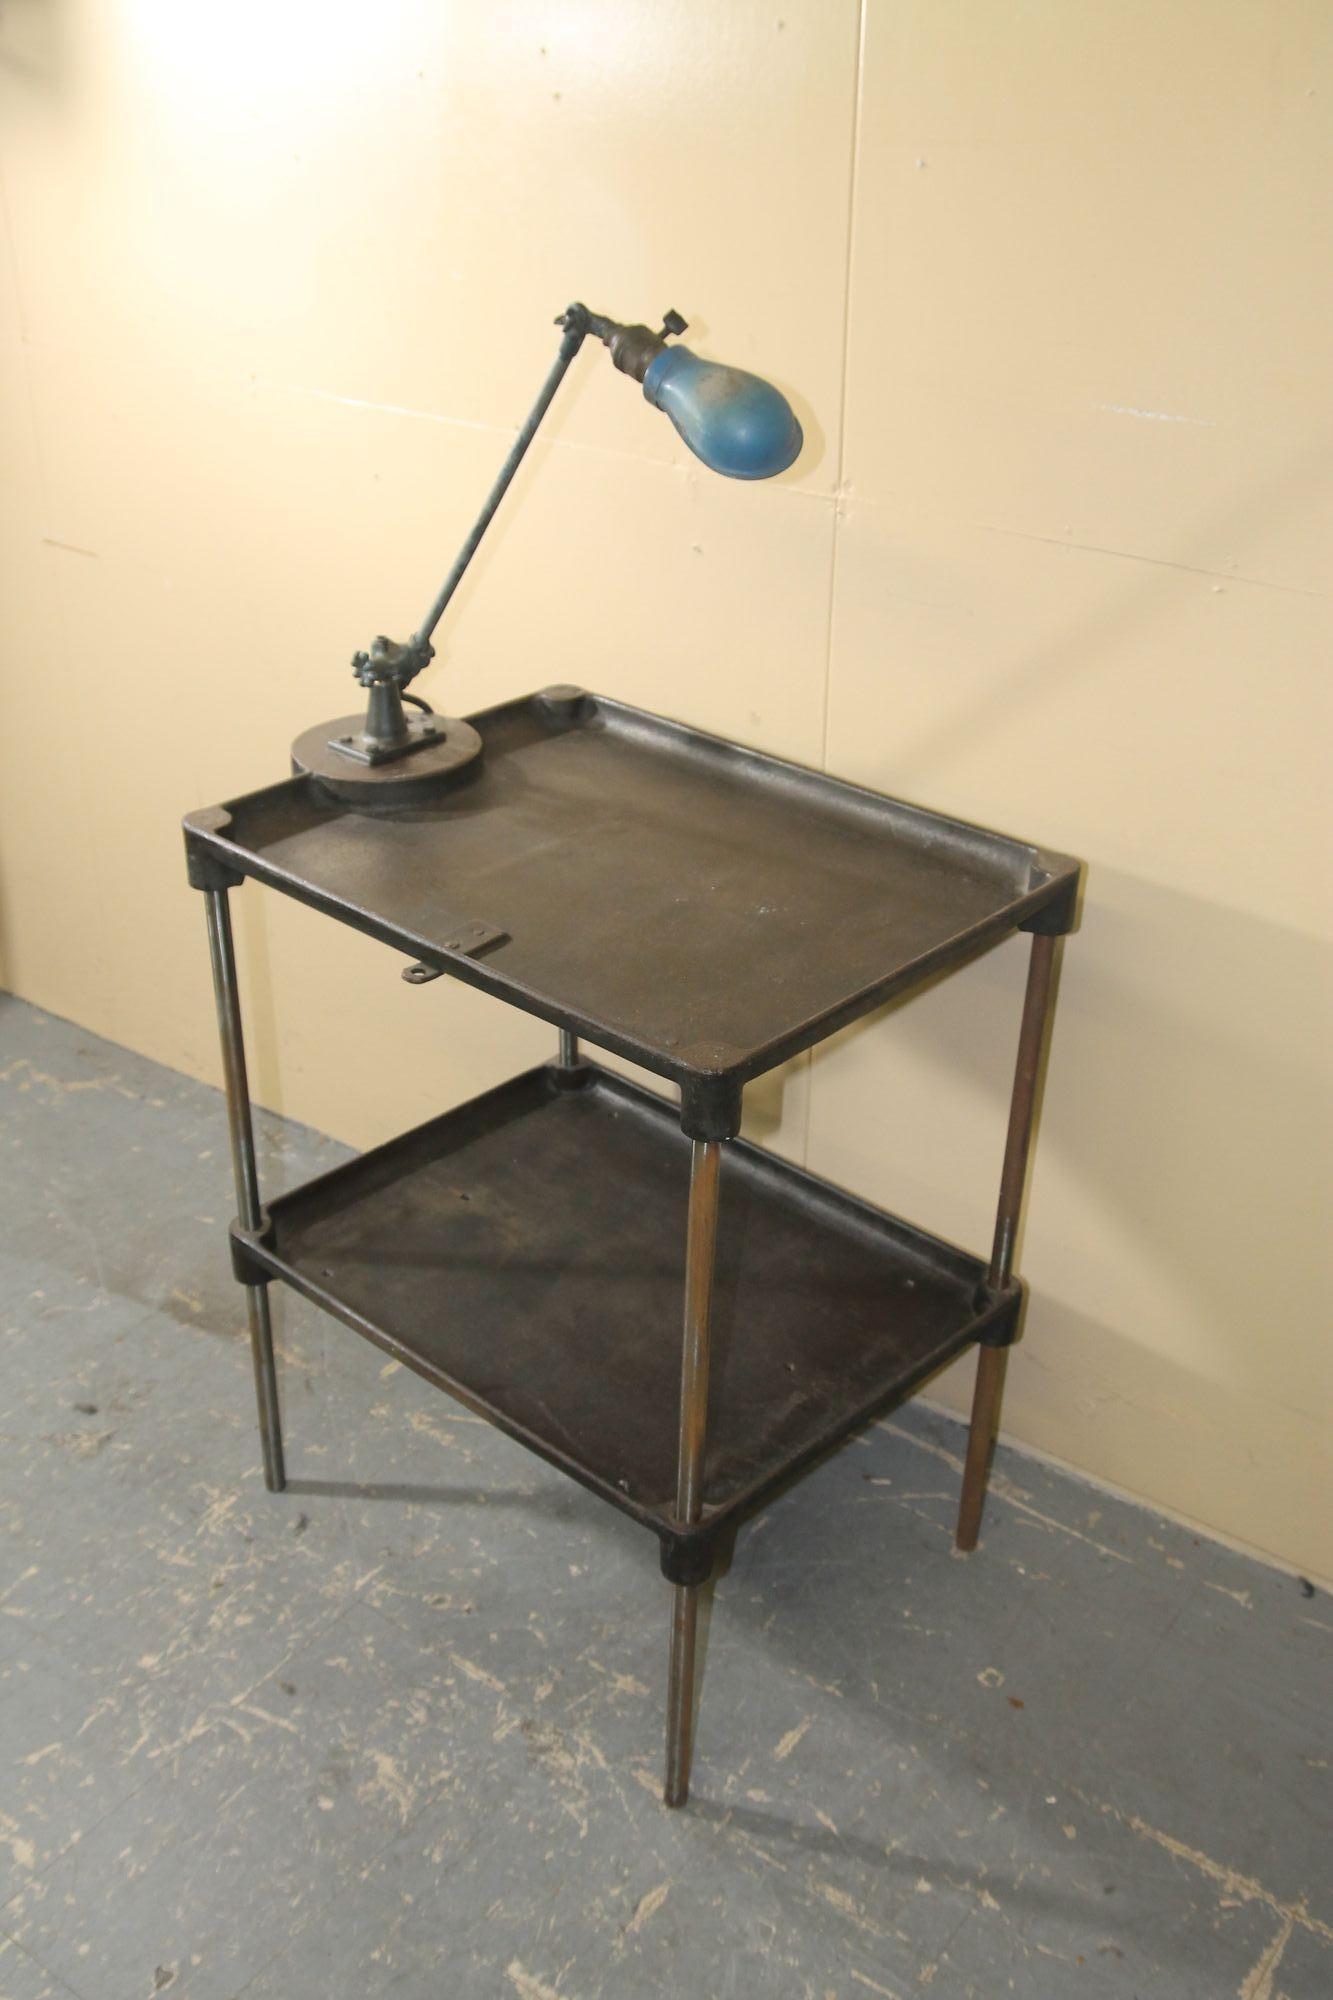 Vintage metal industrial work table with OC white lamp attached In Good Condition For Sale In Asbury Park, NJ